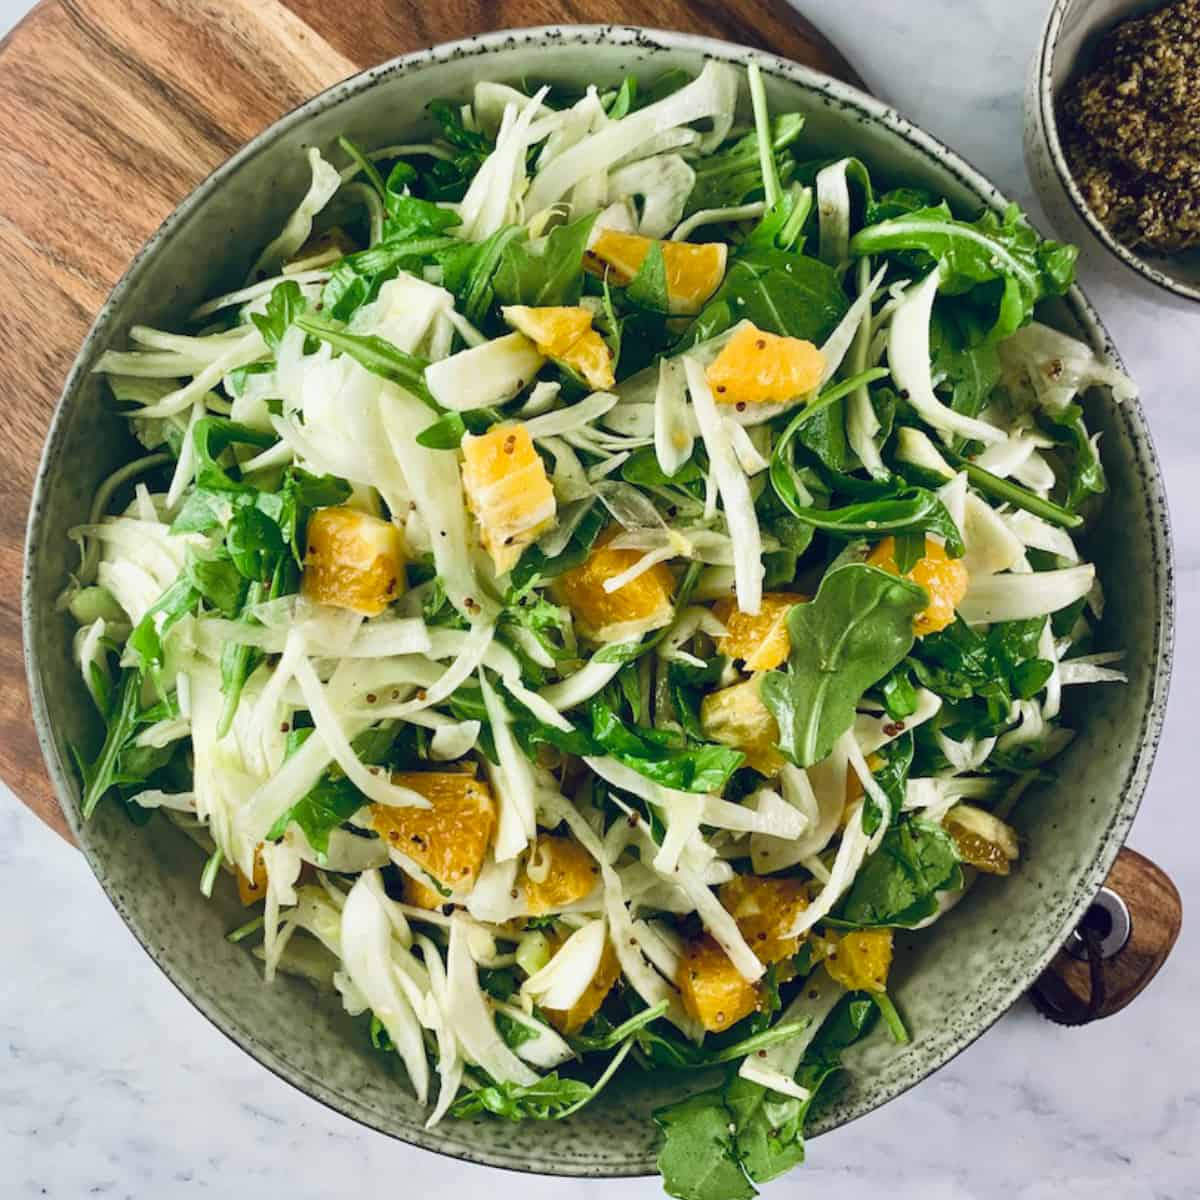 fennel and orange salad in a bowl on wooden board with mustard in a bowl on the side